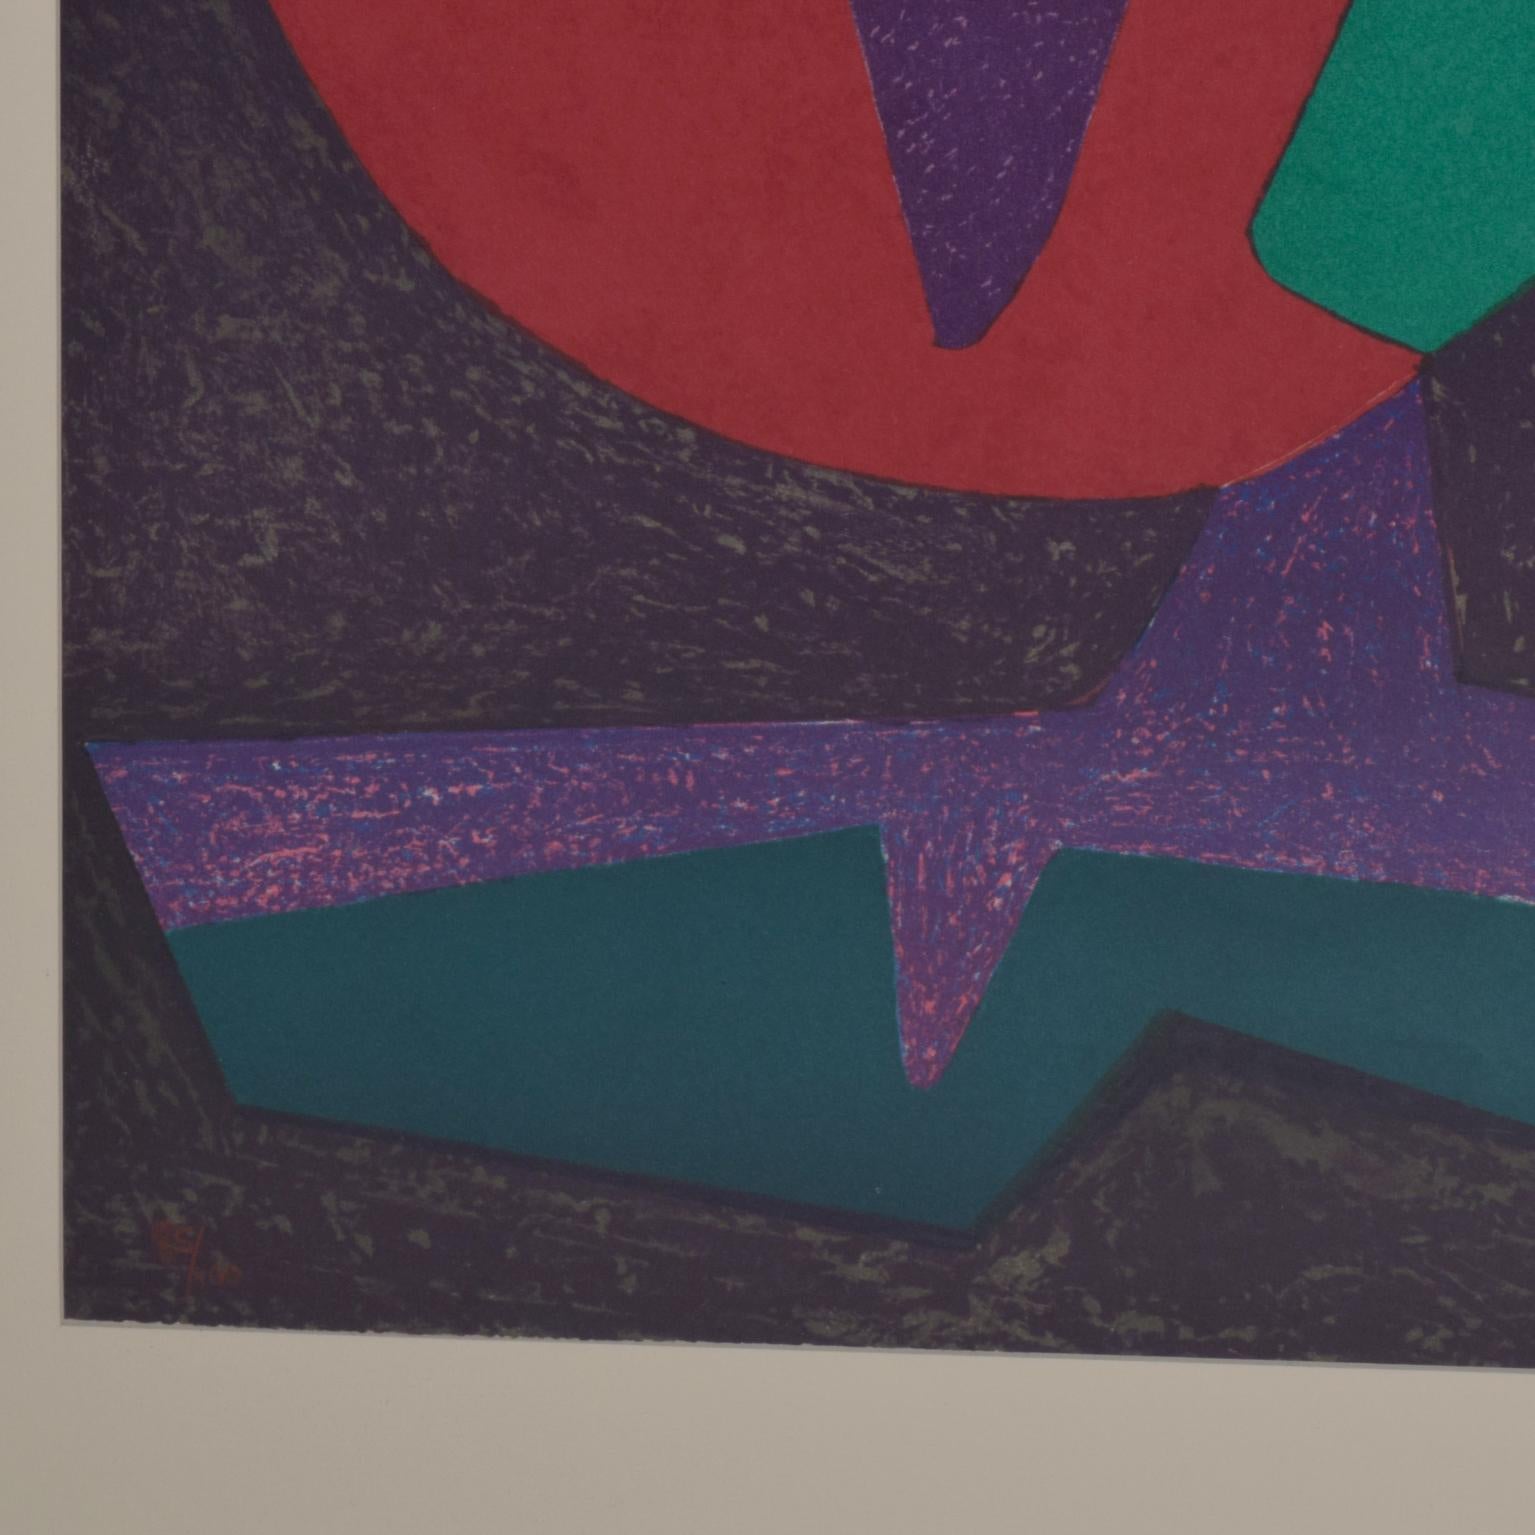 1980s Pedro Coronel Abstract Purple Dove Lithograph
signed numbered
29.5 x 42 H x 1.25 D, Art 21 x 29.5
Original unrestored vintage condition.
See images provided.